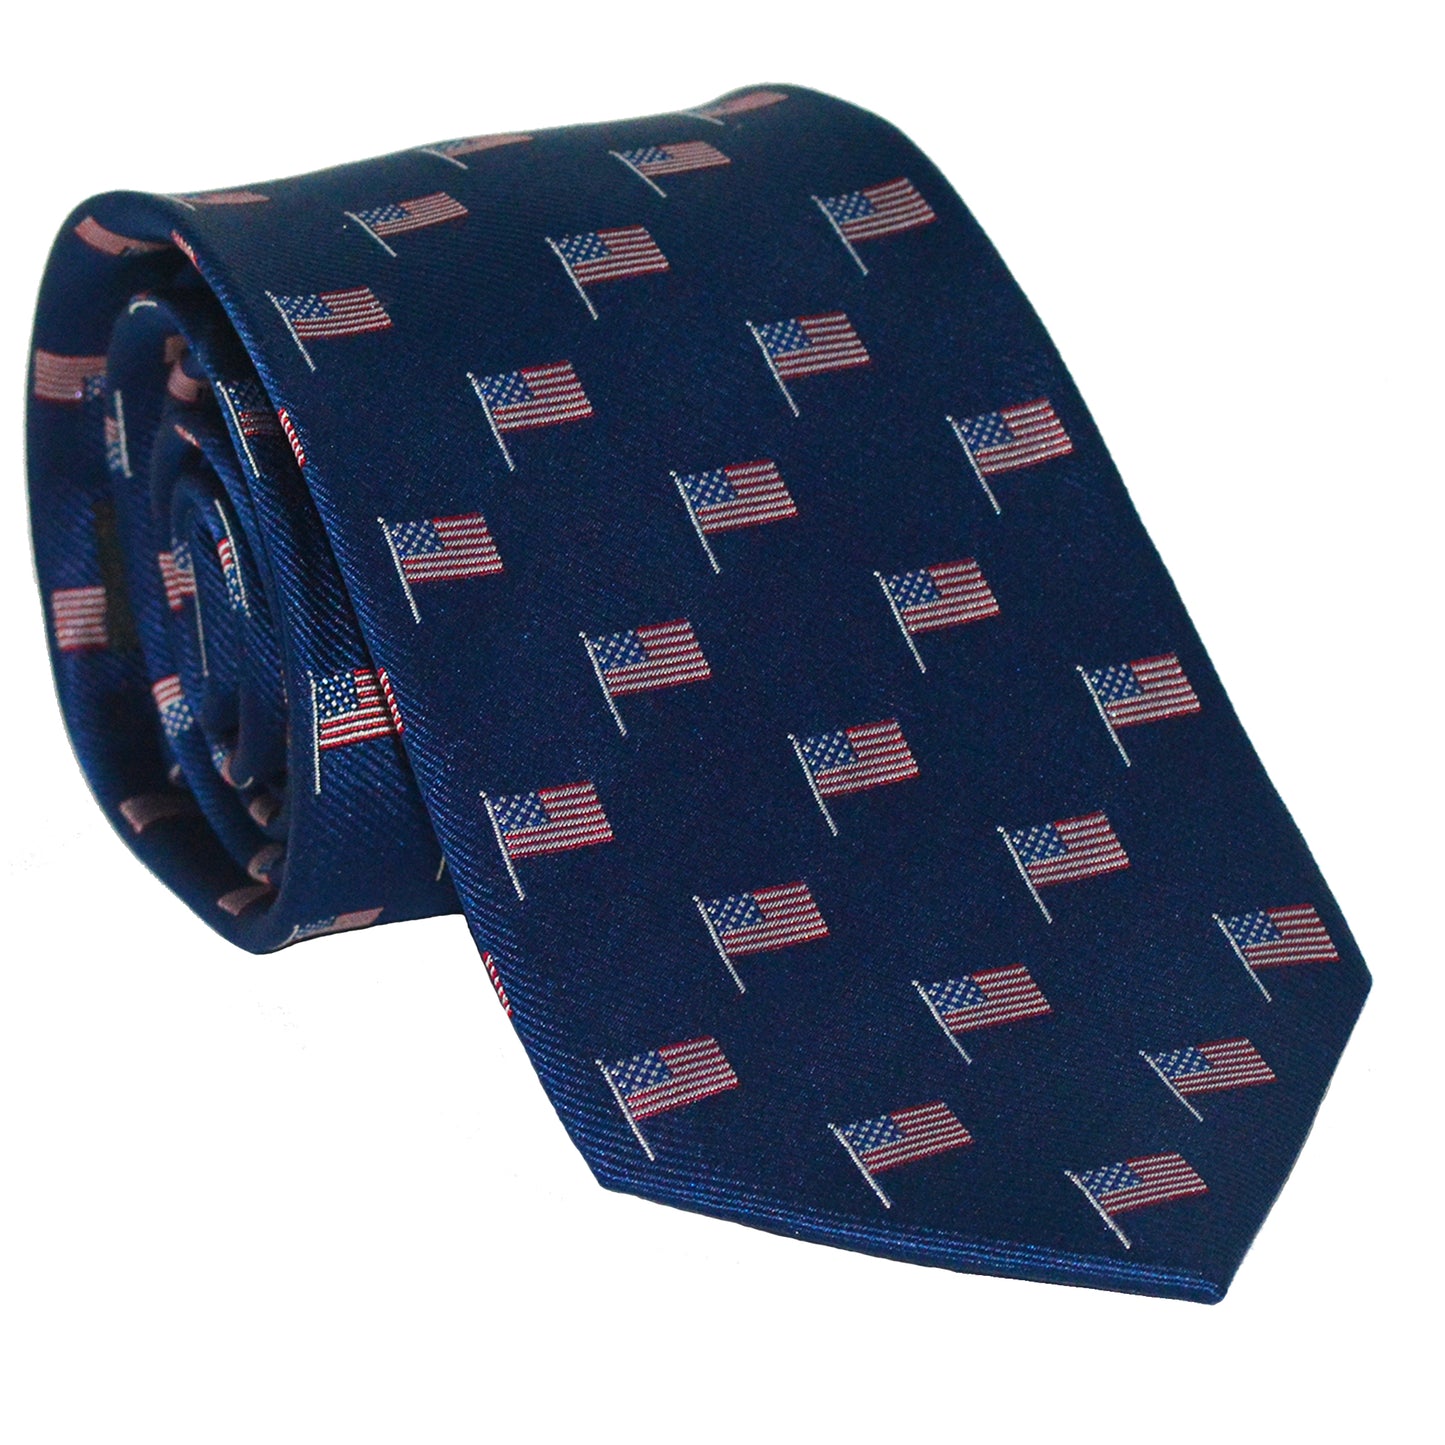 American Flag Necktie - Red White and Blue on Navy, Woven Silk - SummerTies